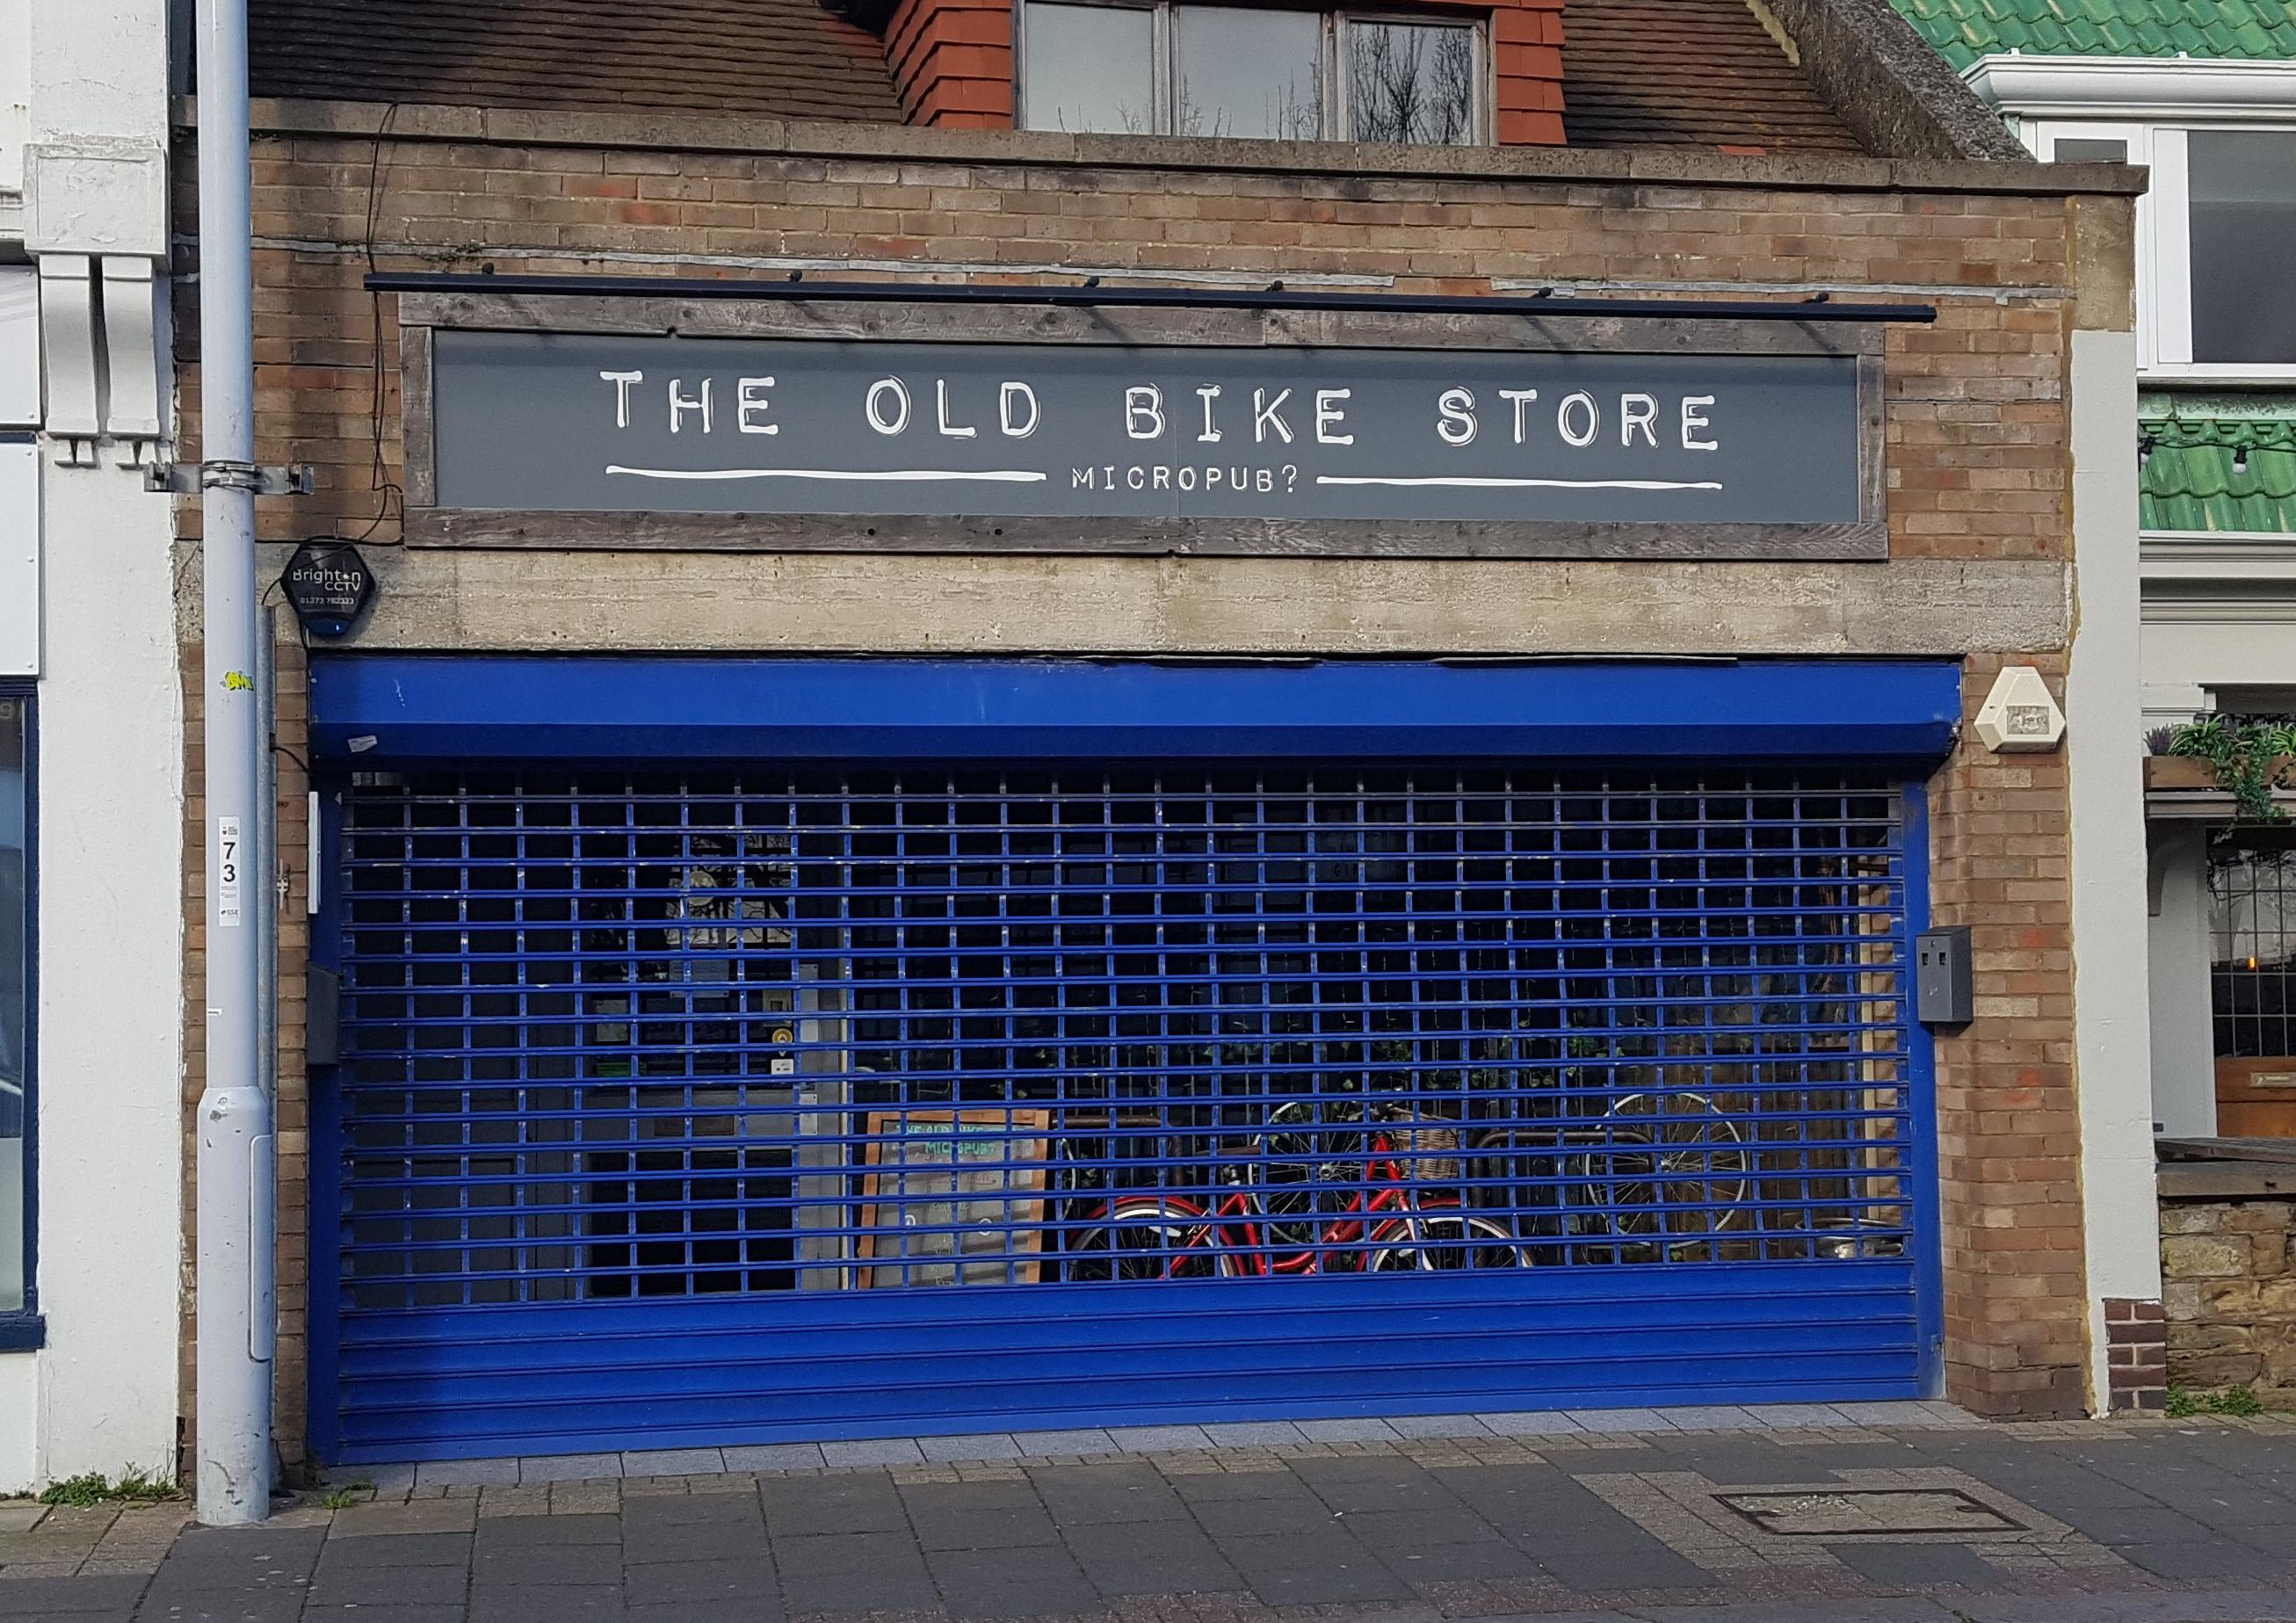 In November 2018, The Old Bike Store was right at the forefront of Worthing's micropub boom